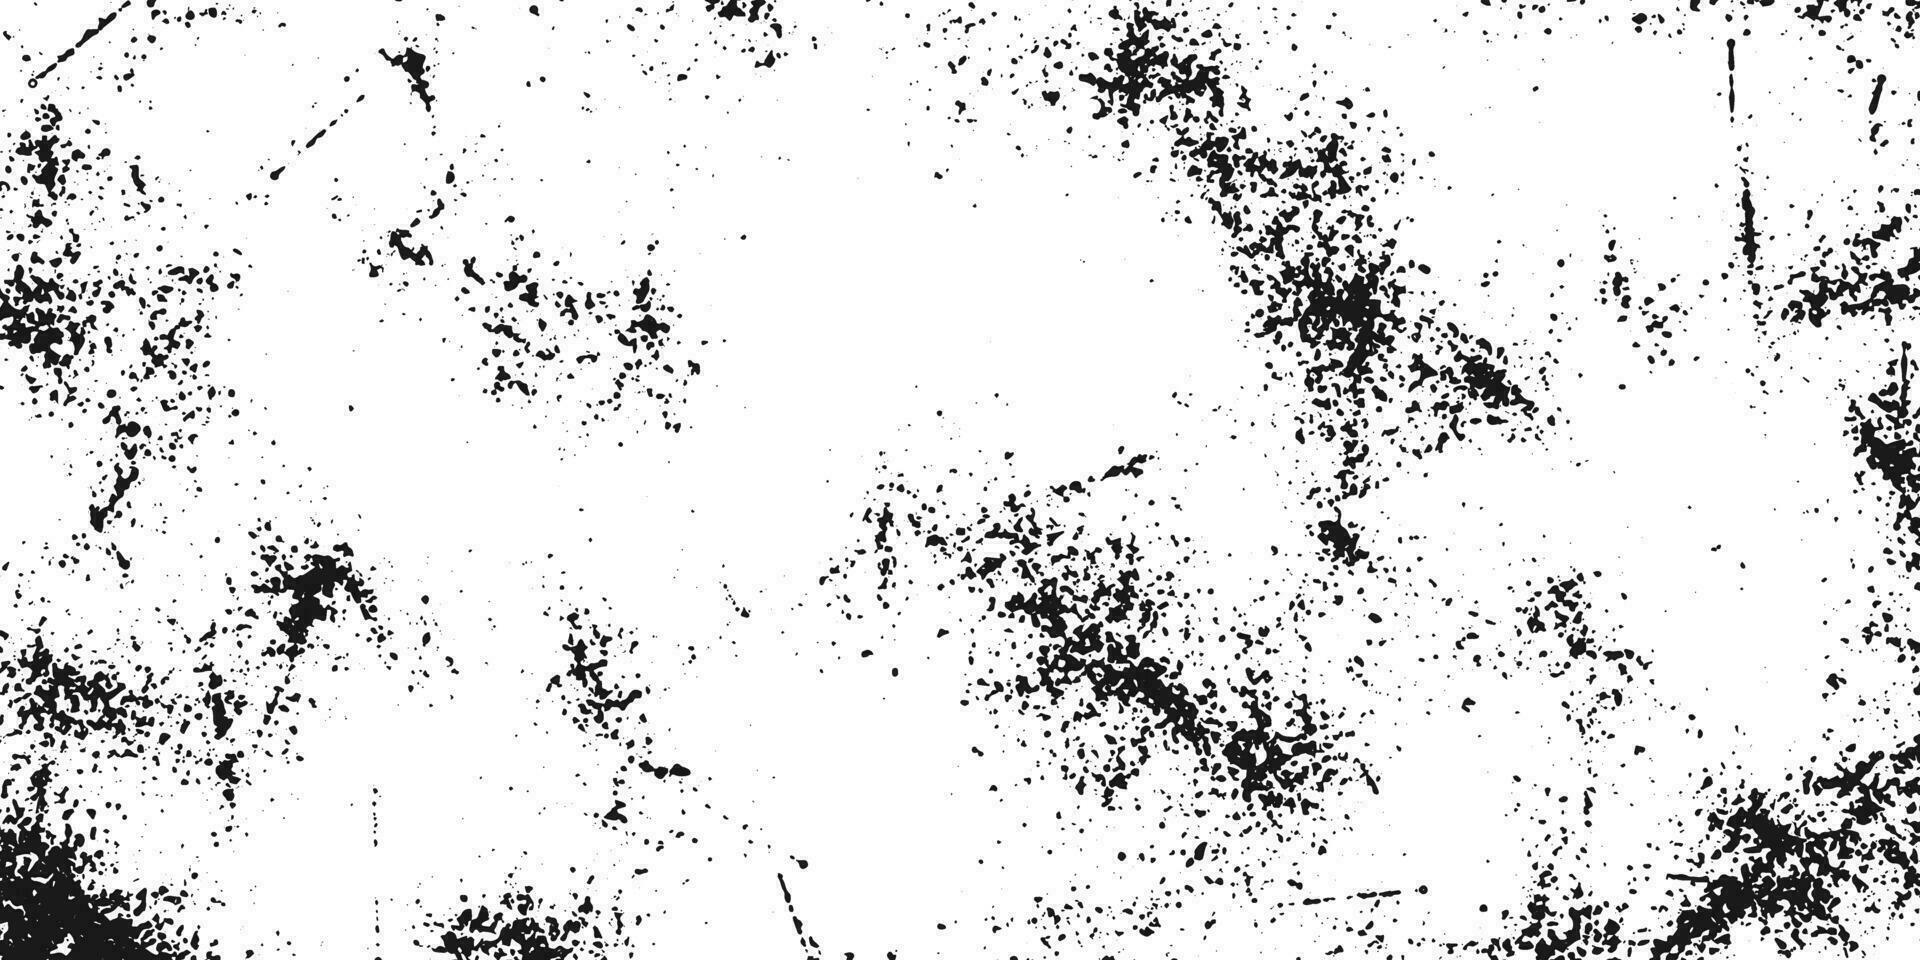 black and white grunge texture background vector